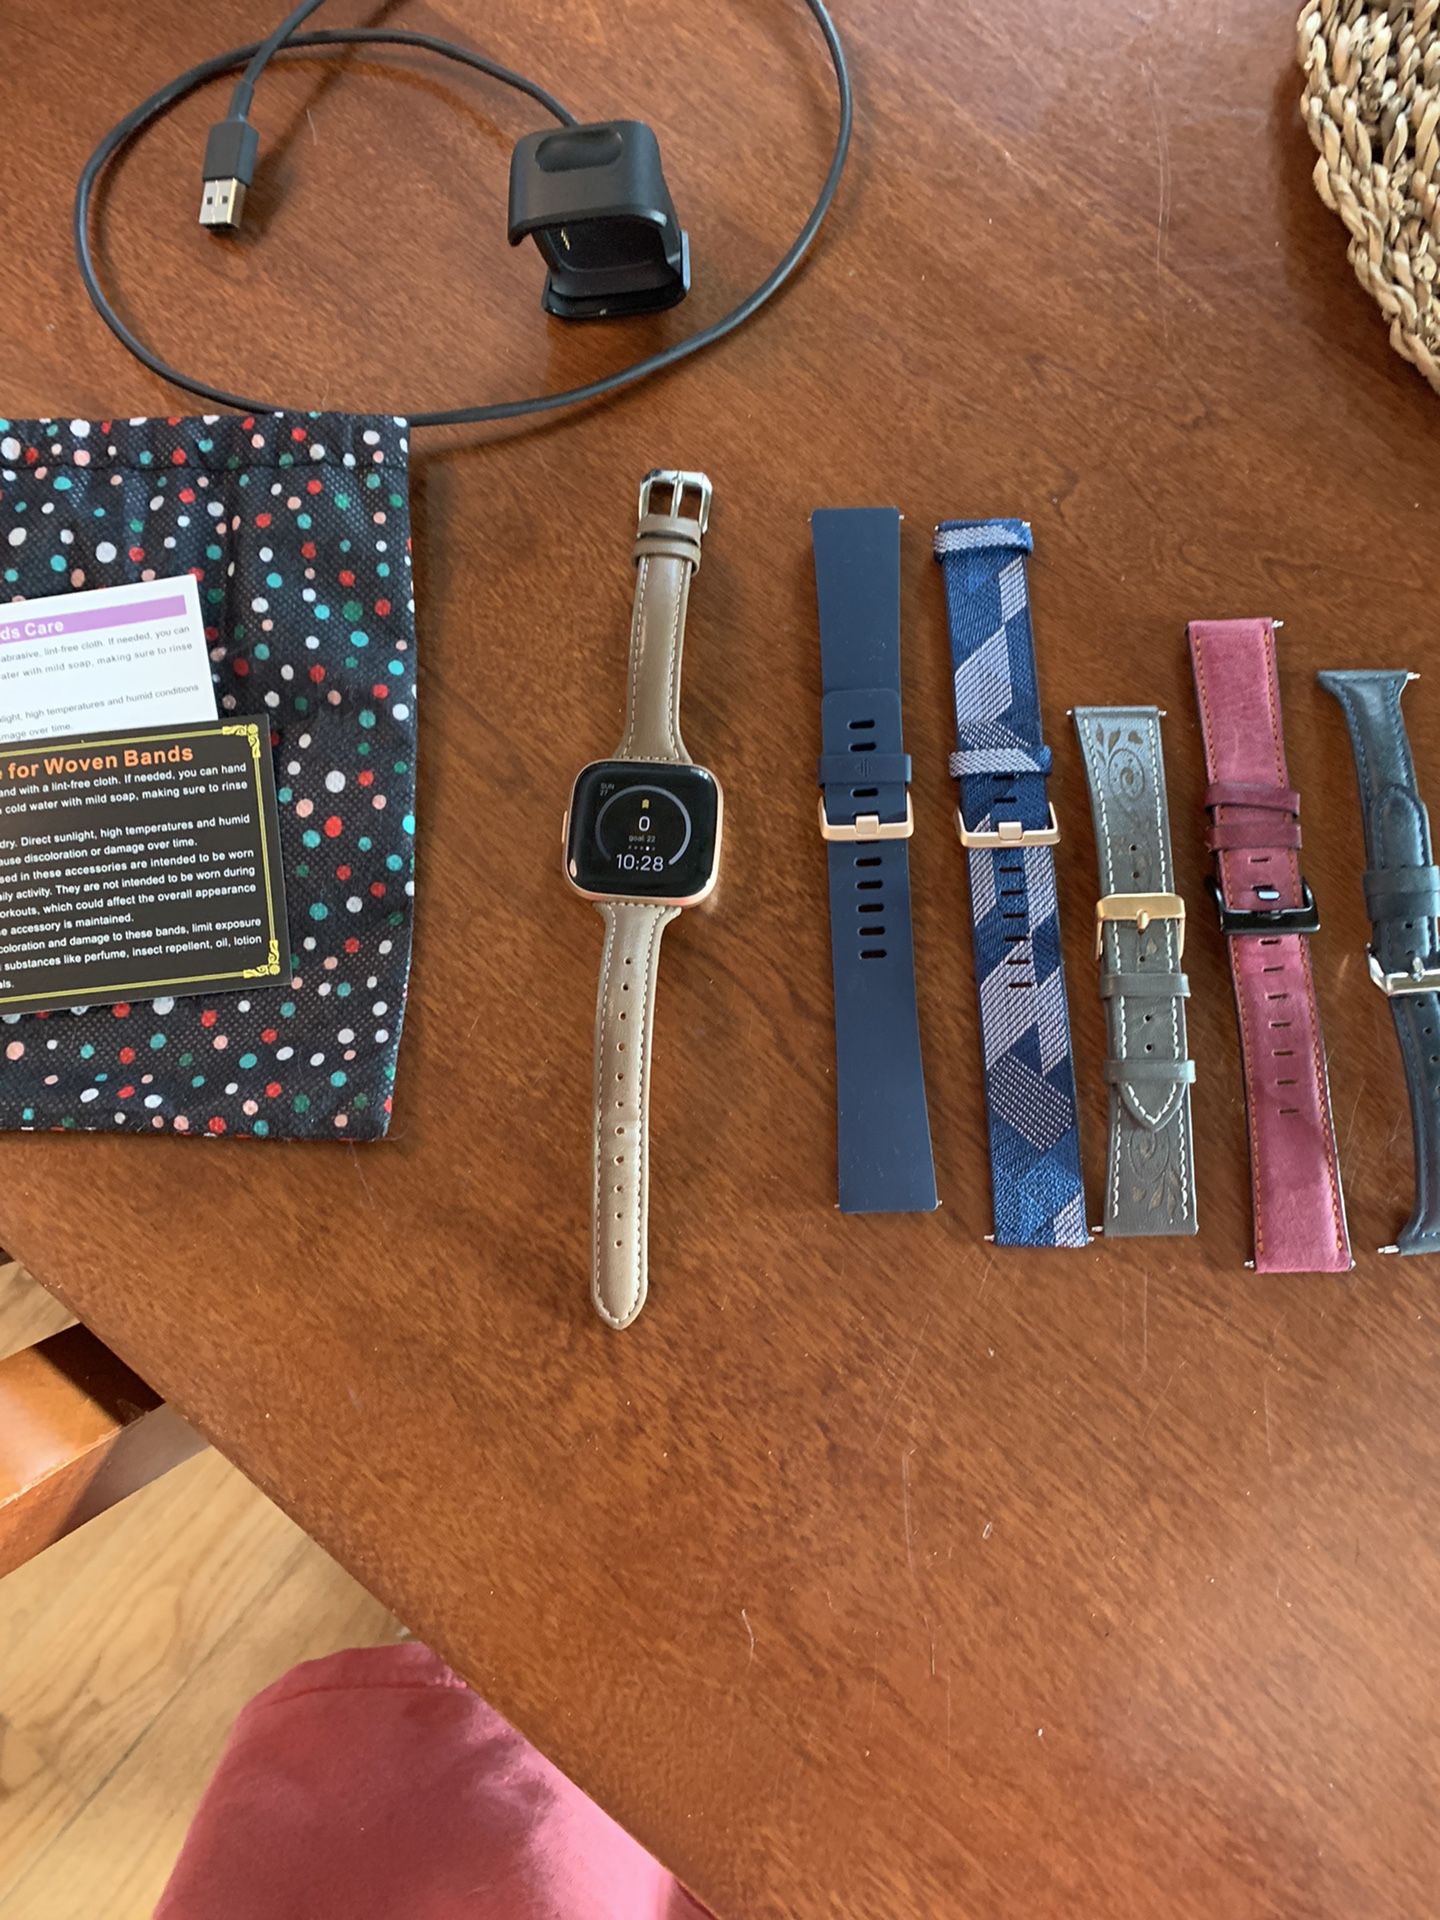 Fitbit Versa 2  With Charger, Dongle, And Many Bands.